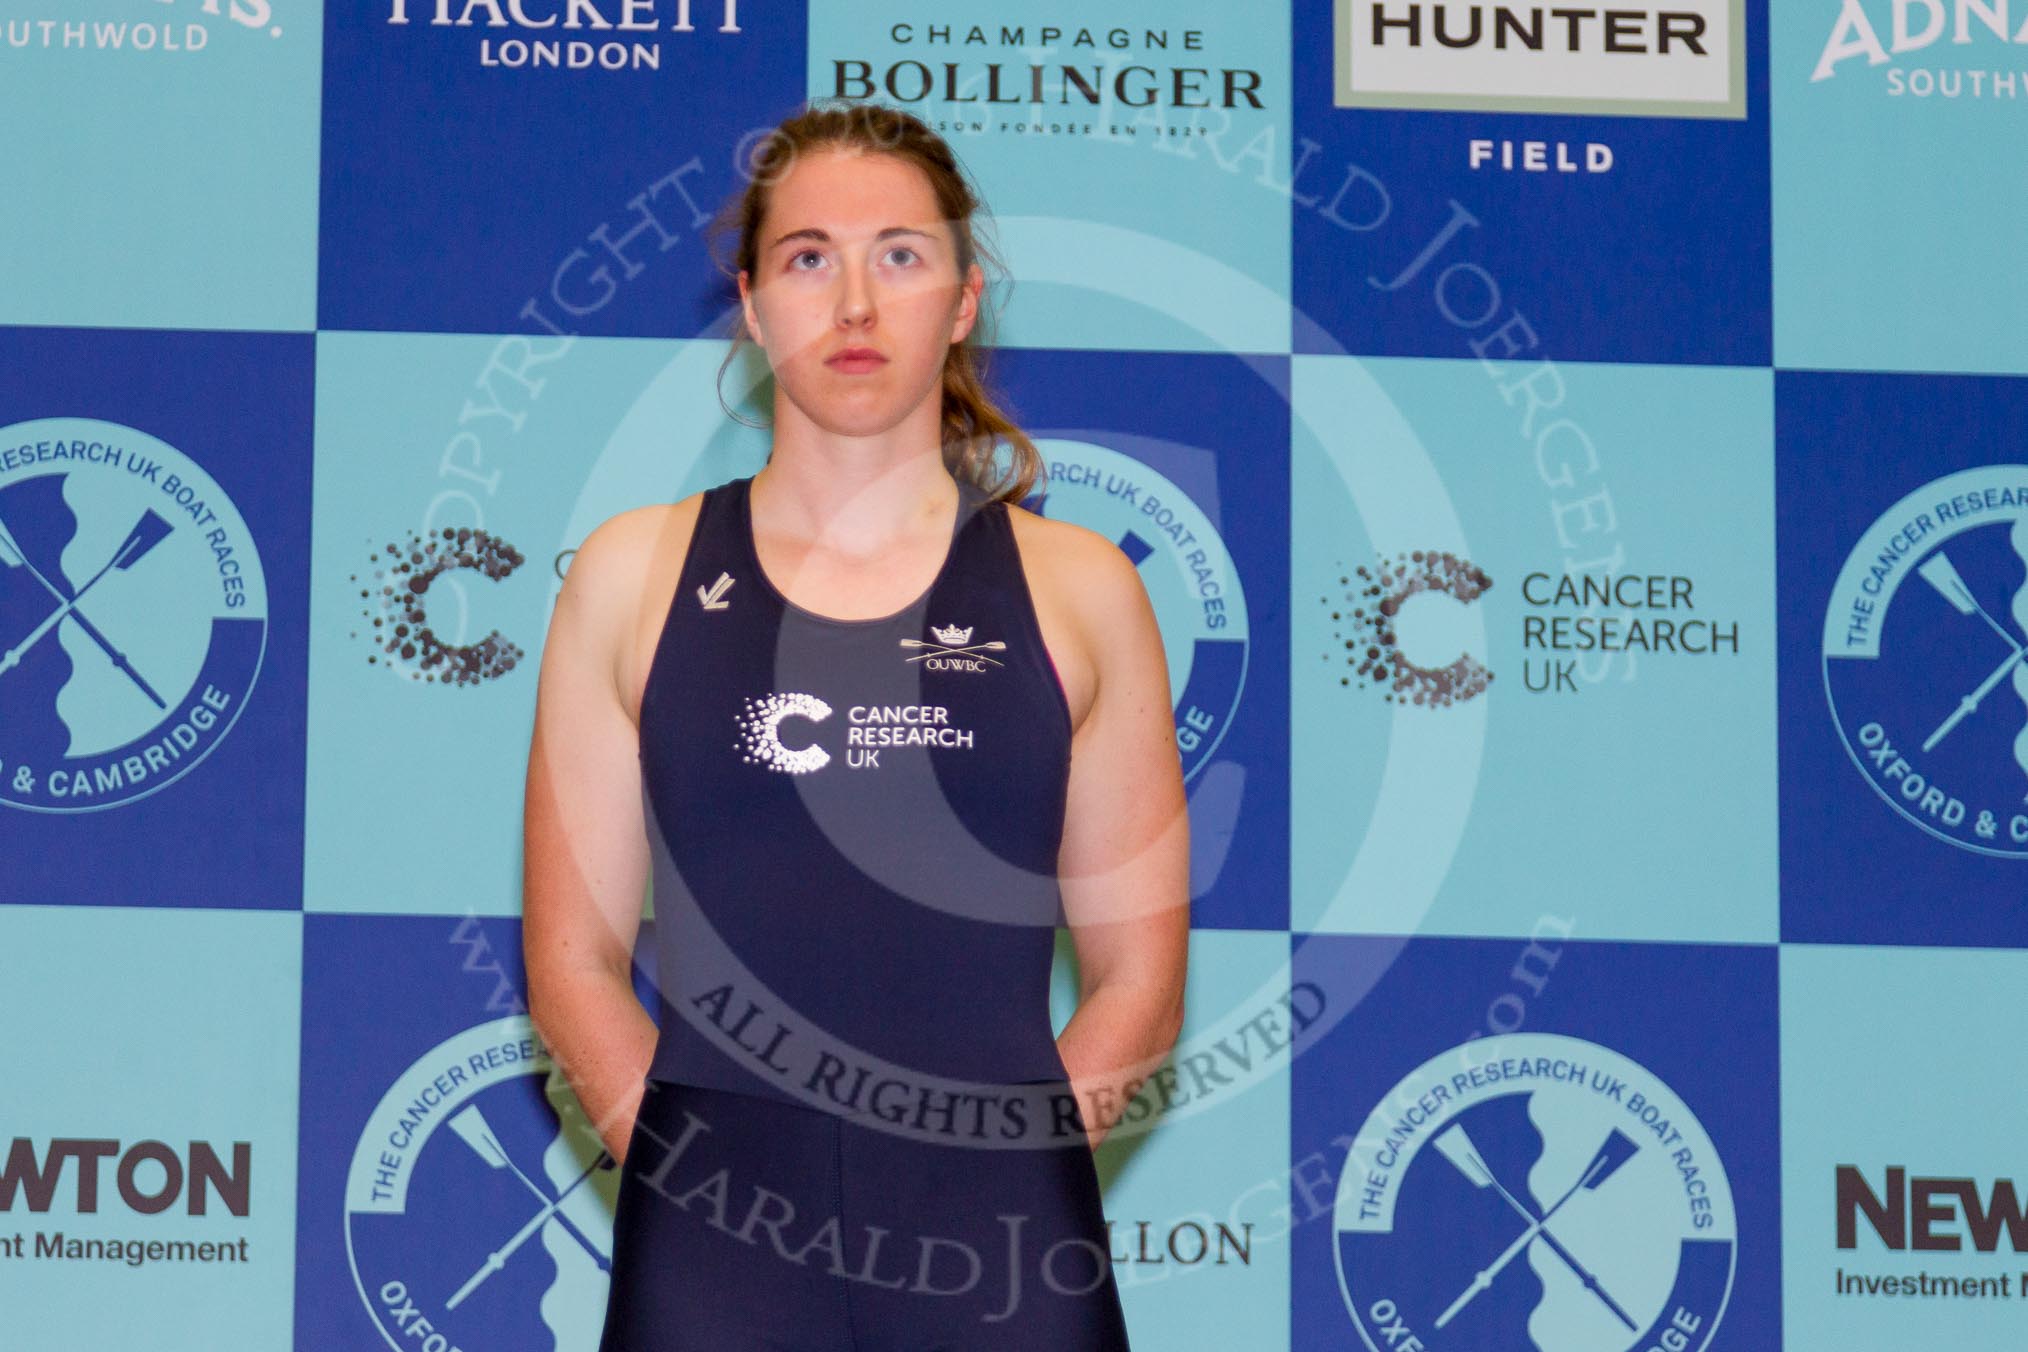 The Boat Race season 2016 - Crew Announcement and Weigh-In: The Women's Boat Race, 4 seat: Oxford: Ruth Siddorn – 75.2kg.
Westmister Hall, Westminster,
London SW11,

United Kingdom,
on 01 March 2016 at 10:11, image #31